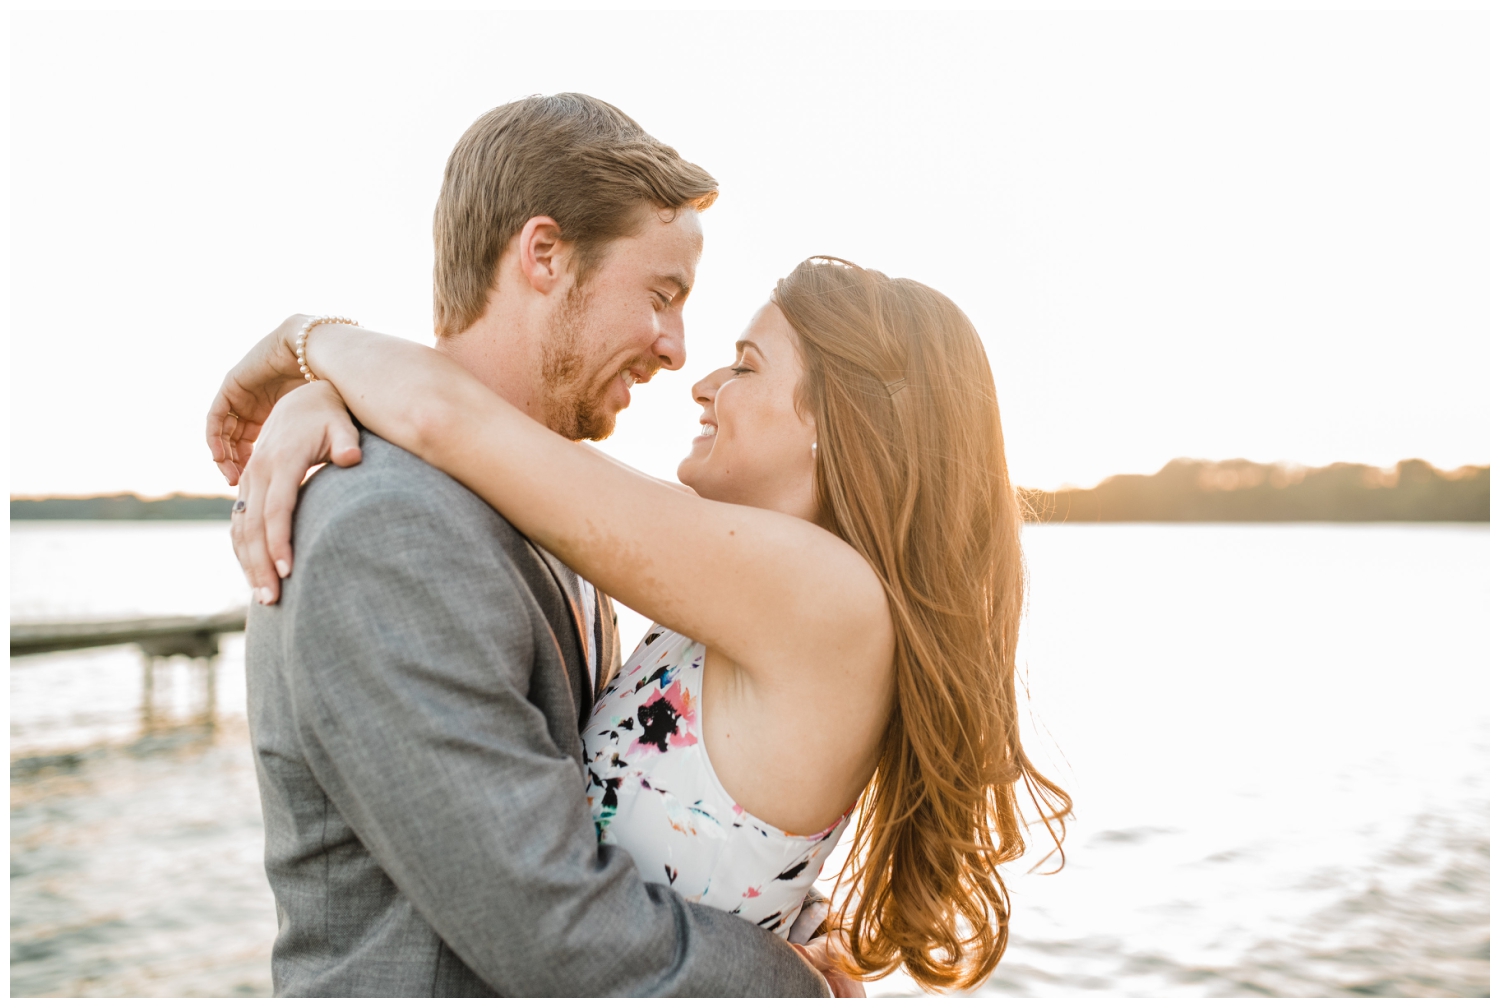 White Rock Lake and Uptown Dallas Engagement Session